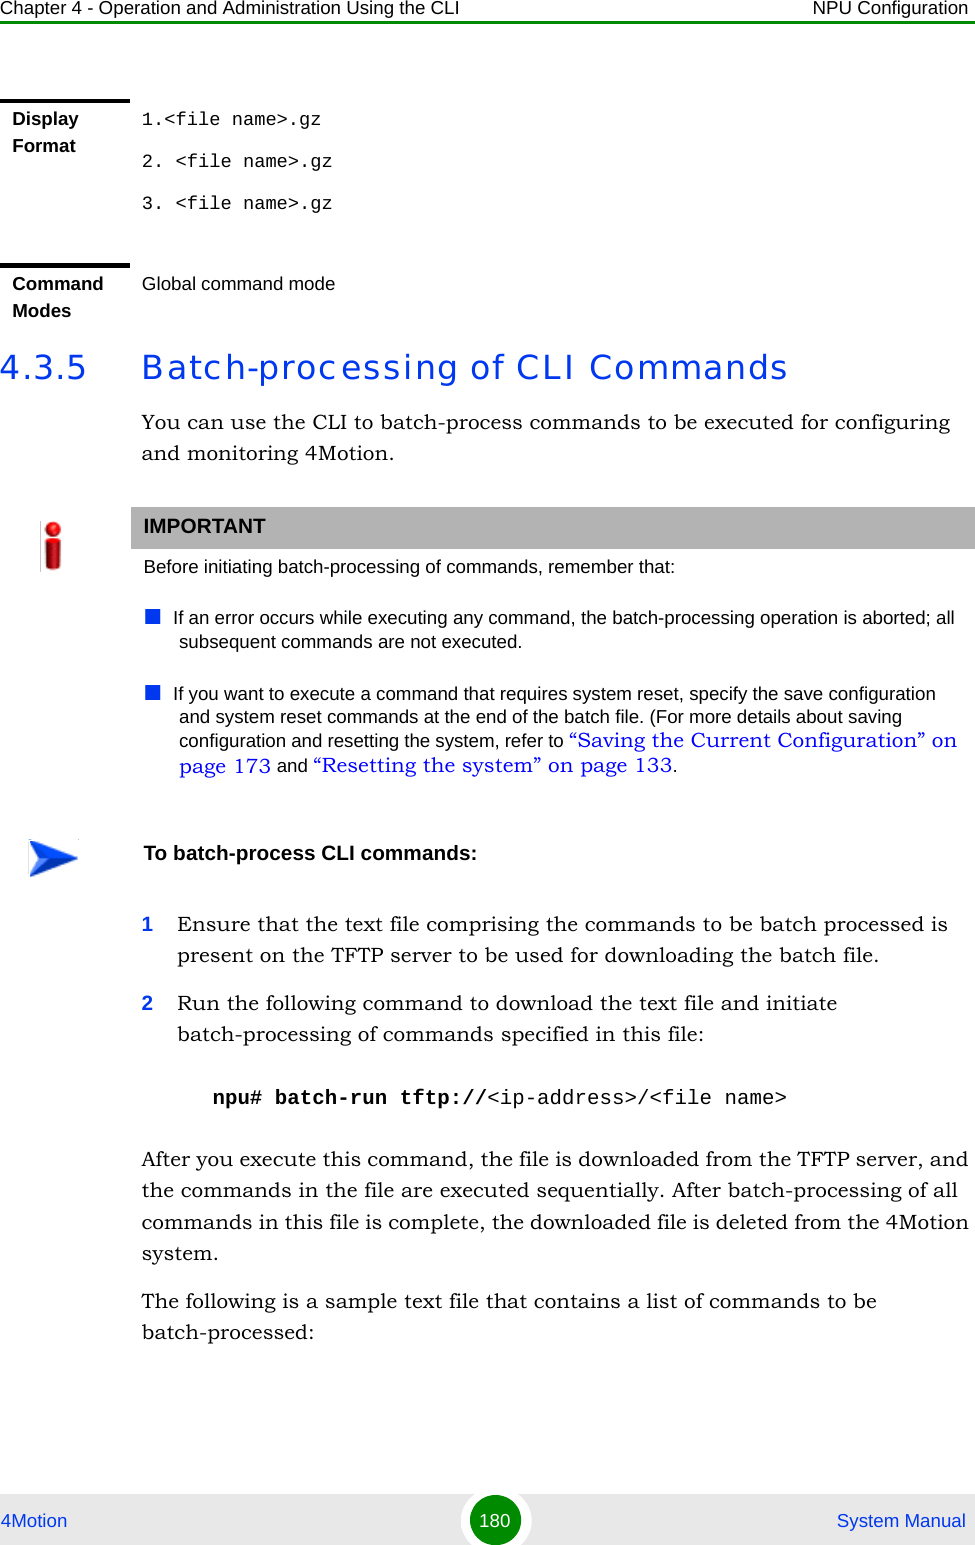 Chapter 4 - Operation and Administration Using the CLI NPU Configuration4Motion 180  System Manual4.3.5 Batch-processing of CLI CommandsYou can use the CLI to batch-process commands to be executed for configuring and monitoring 4Motion.1Ensure that the text file comprising the commands to be batch processed is present on the TFTP server to be used for downloading the batch file. 2Run the following command to download the text file and initiate batch-processing of commands specified in this file:npu# batch-run tftp://&lt;ip-address&gt;/&lt;file name&gt;After you execute this command, the file is downloaded from the TFTP server, and the commands in the file are executed sequentially. After batch-processing of all commands in this file is complete, the downloaded file is deleted from the 4Motion system.The following is a sample text file that contains a list of commands to be batch-processed:Display Format1.&lt;file name&gt;.gz2. &lt;file name&gt;.gz3. &lt;file name&gt;.gzCommand ModesGlobal command modeIMPORTANTBefore initiating batch-processing of commands, remember that:If an error occurs while executing any command, the batch-processing operation is aborted; all subsequent commands are not executed.If you want to execute a command that requires system reset, specify the save configuration and system reset commands at the end of the batch file. (For more details about saving configuration and resetting the system, refer to “Saving the Current Configuration” on page 173 and “Resetting the system” on page 133.To batch-process CLI commands: